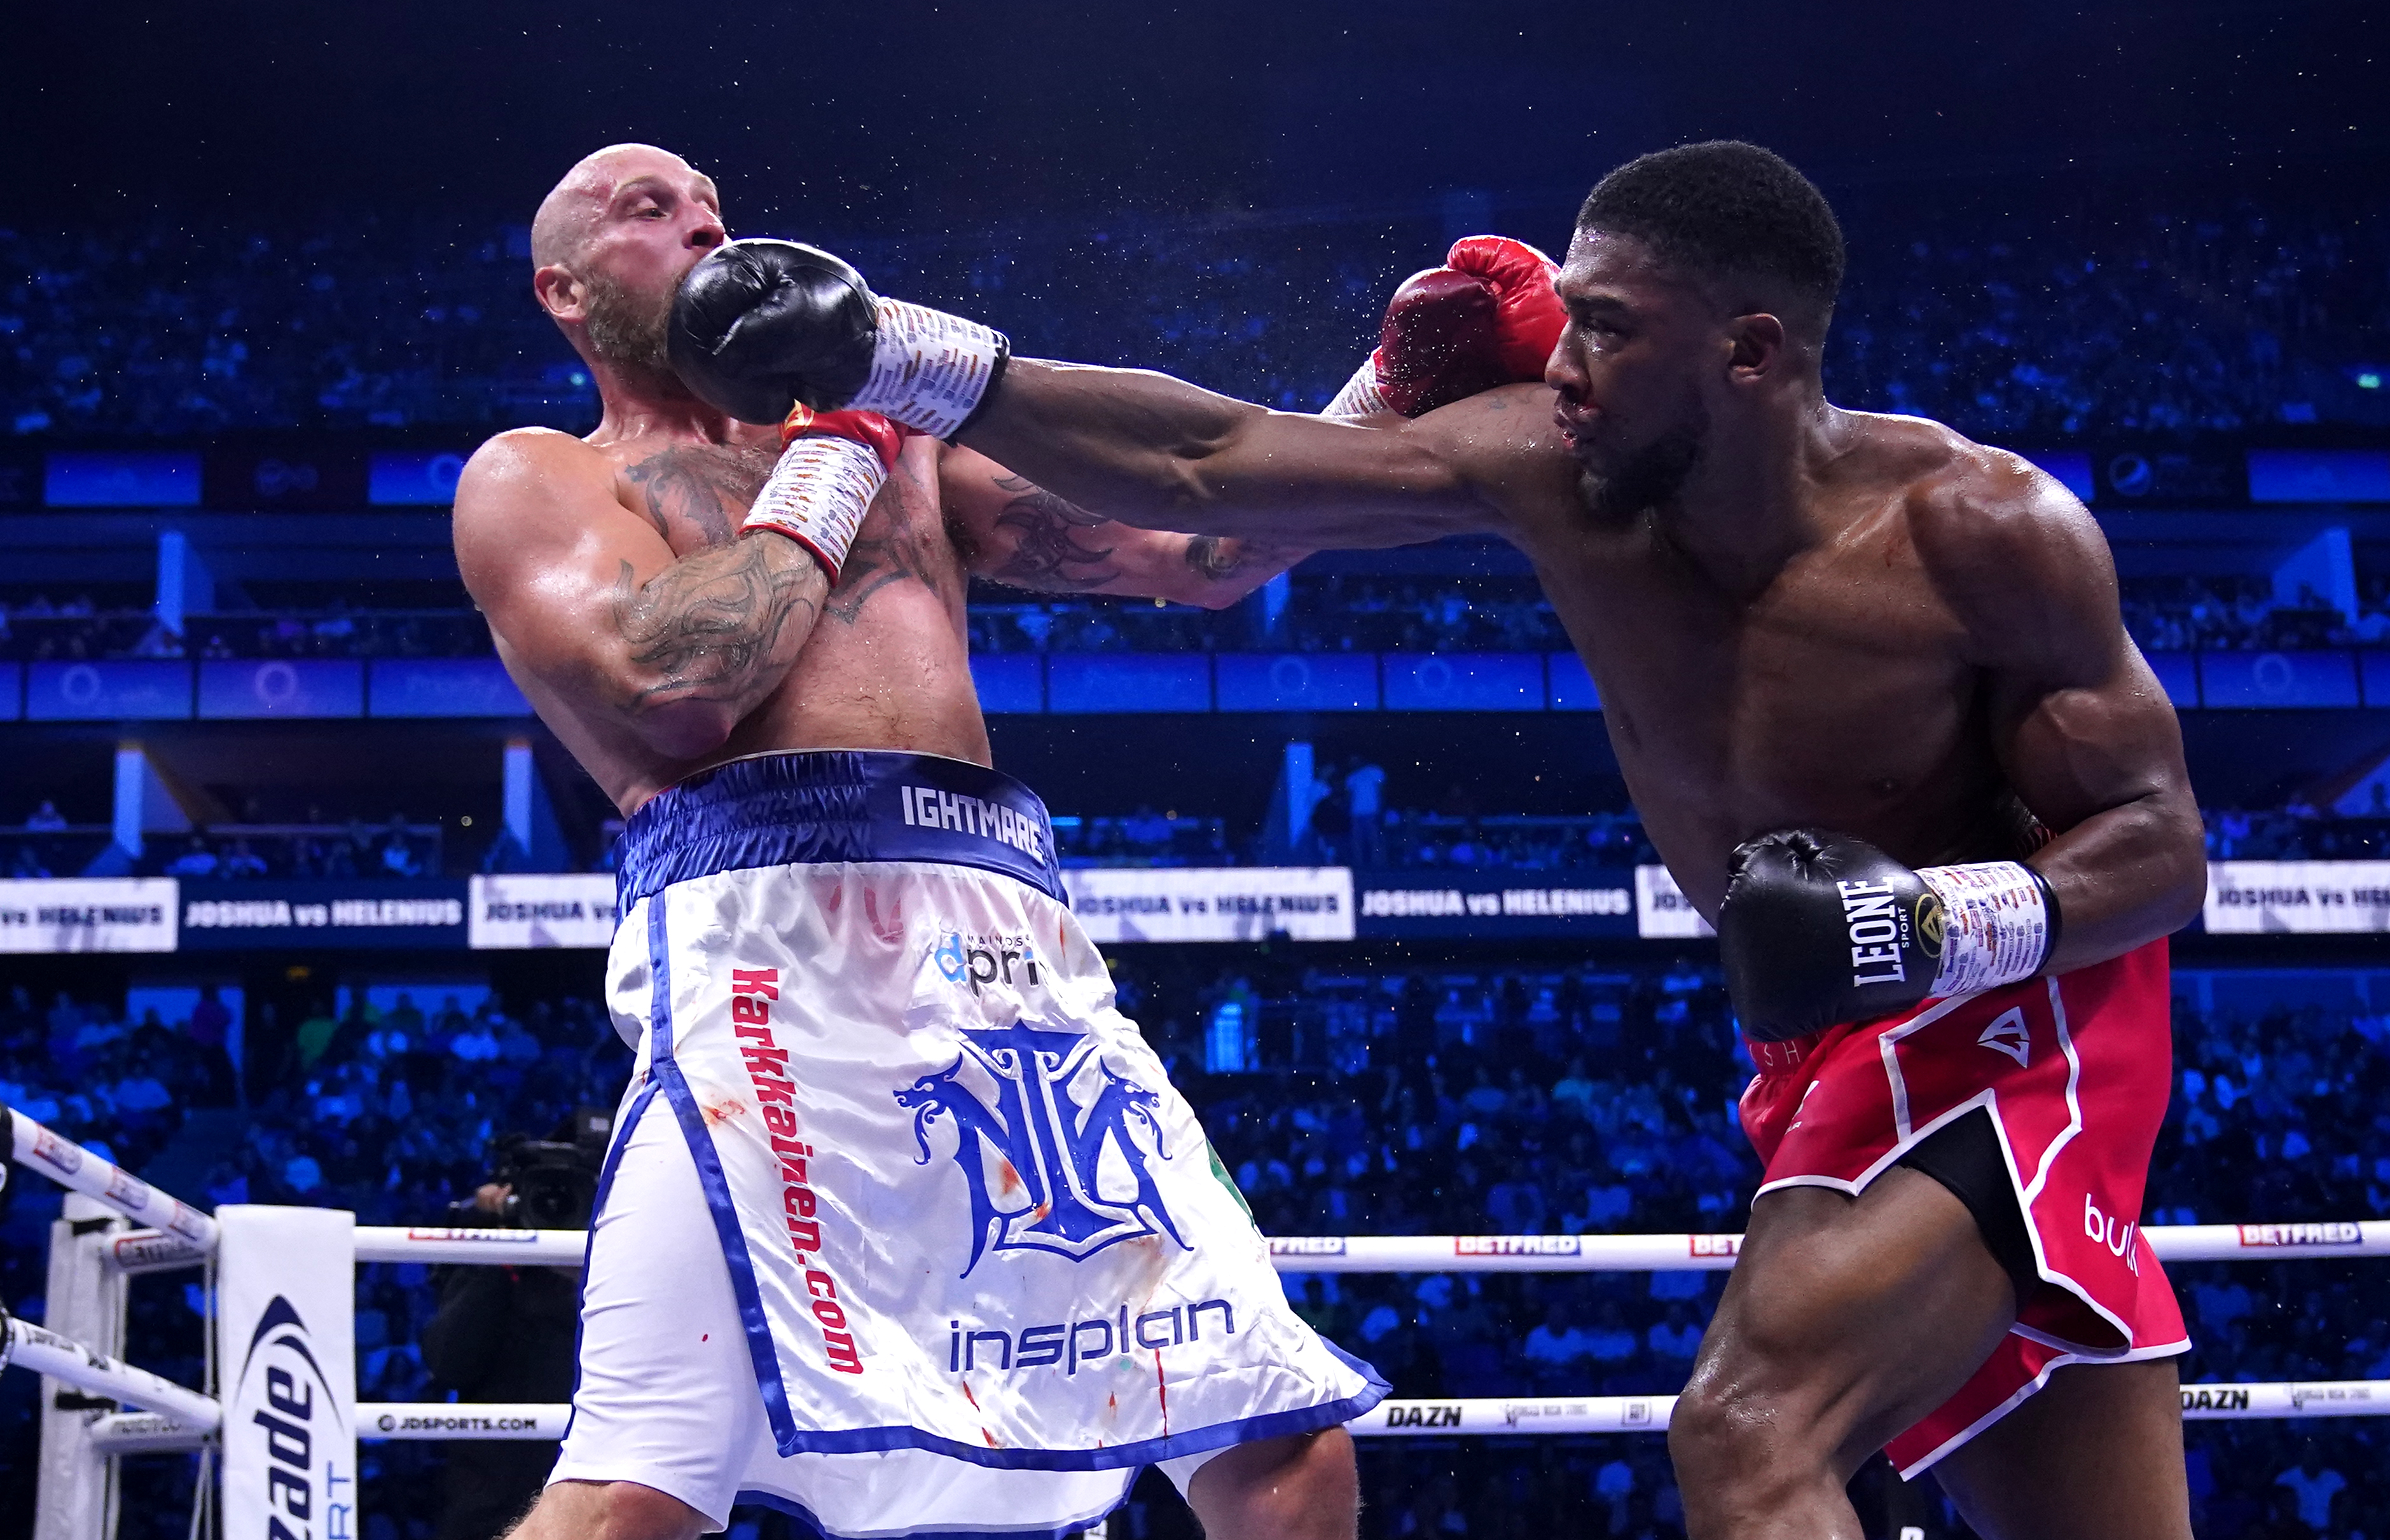 Anthony Joshua won as expected, so is Deontay Wilder up next?